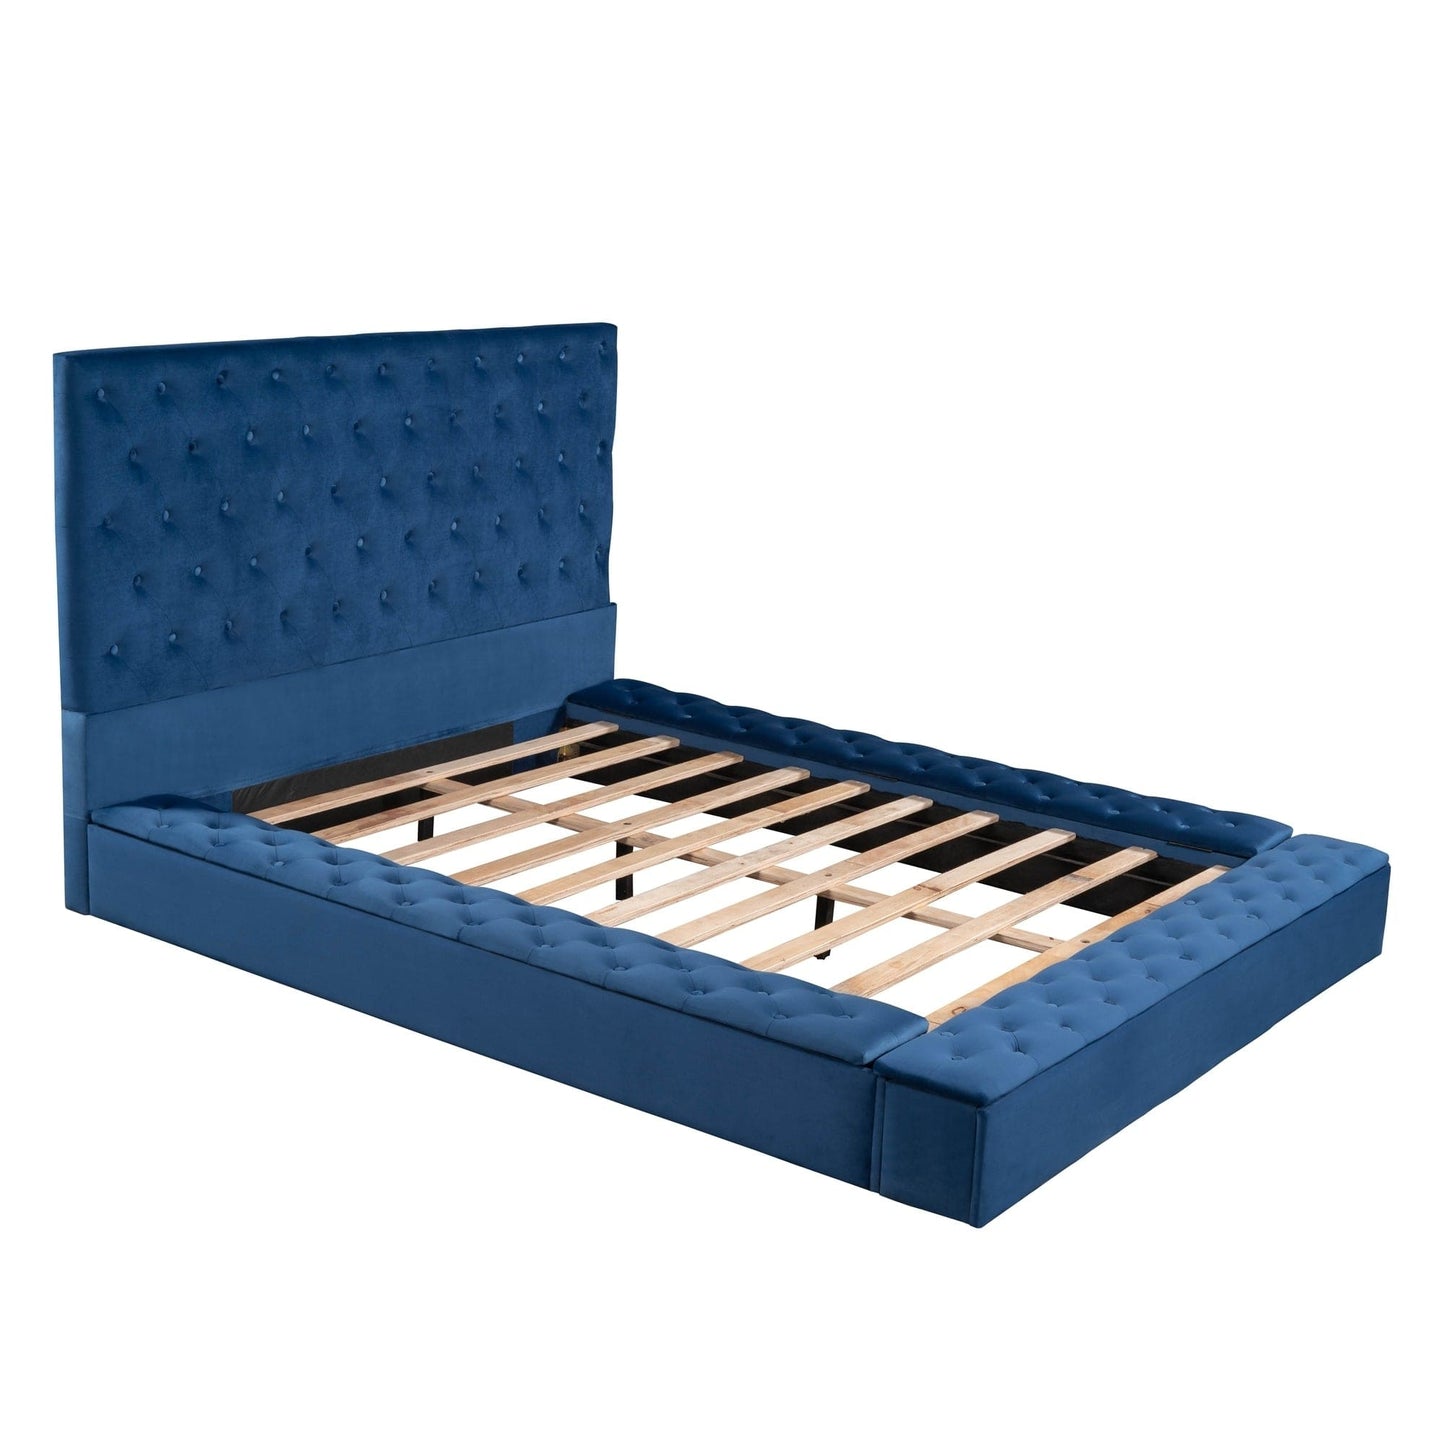 Queen Size Upholstery Low Profile Storage Platform Bed with Storage Space on both Sides and Footboard,Blue